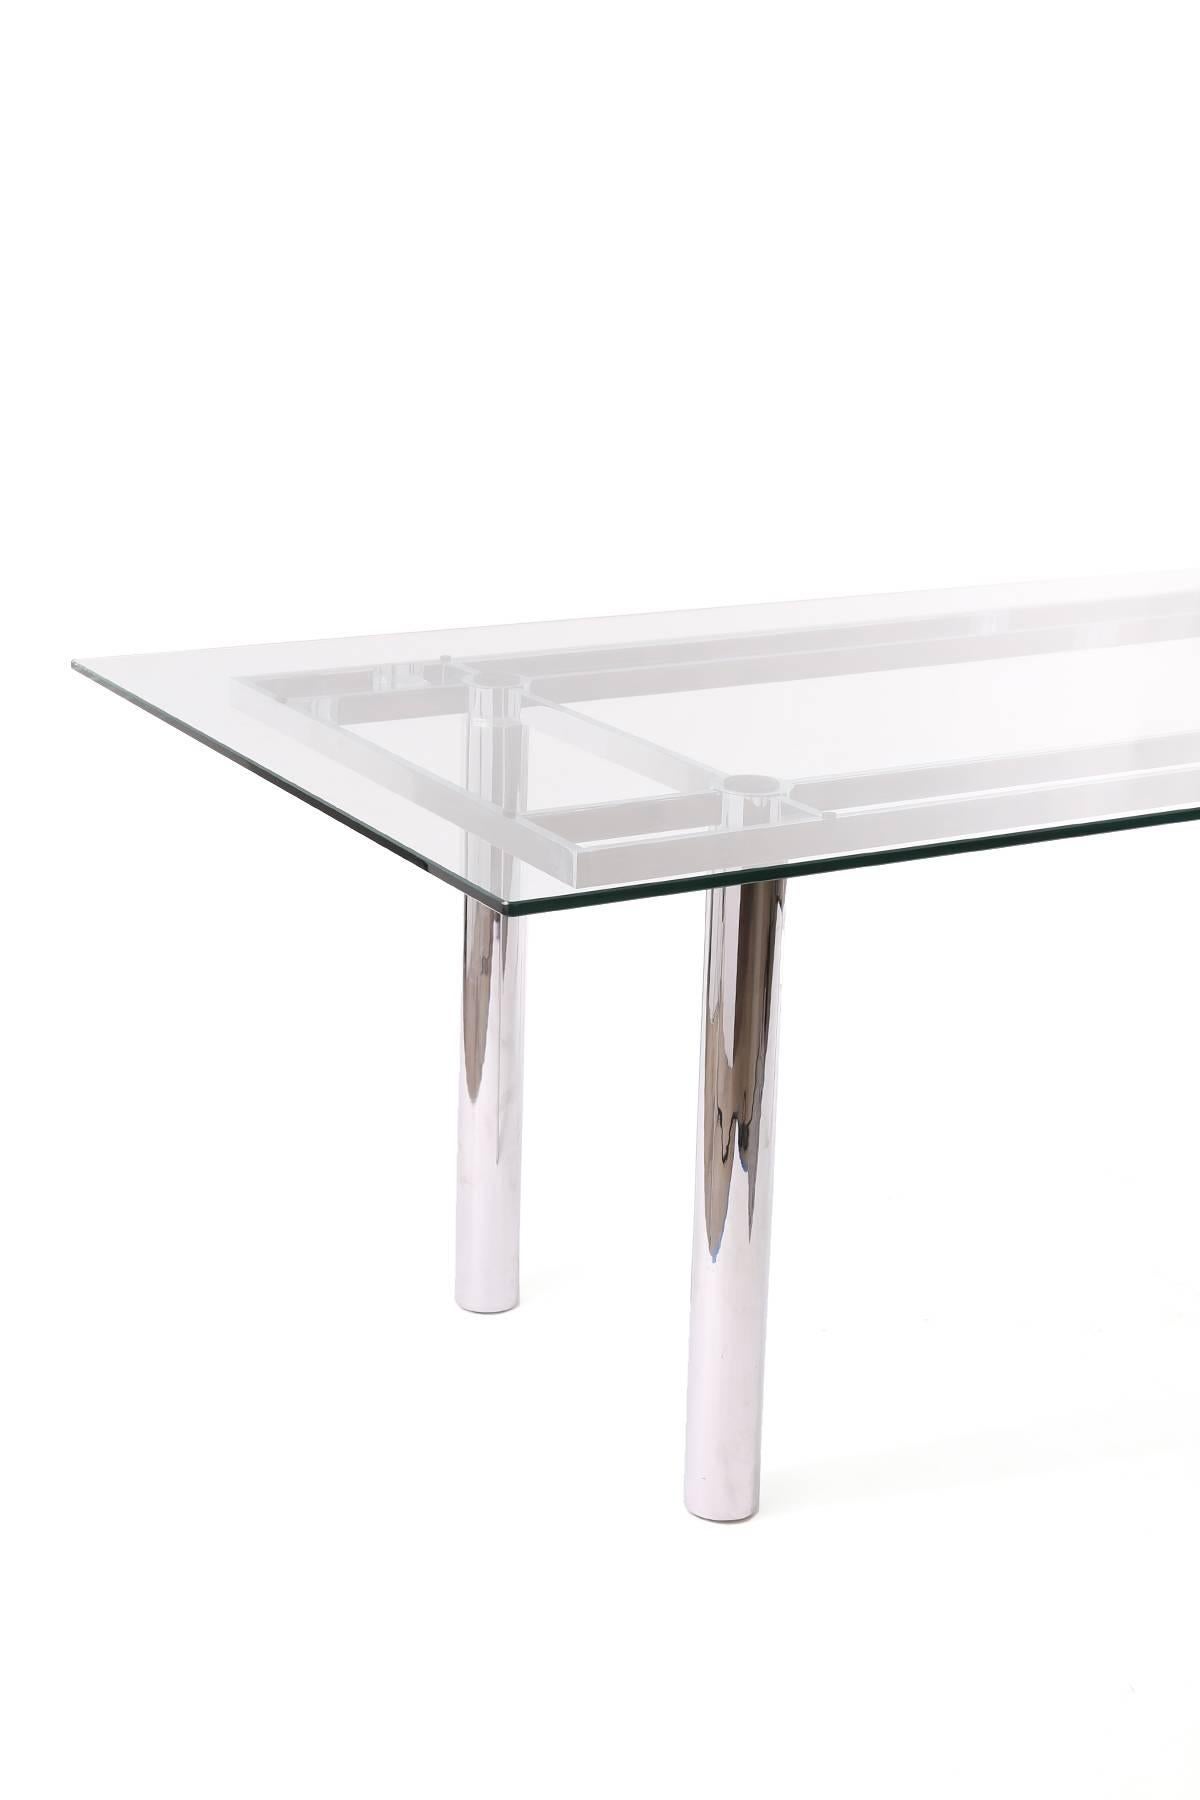 American Scarpa for Knoll Chrome and Leather Dining Table